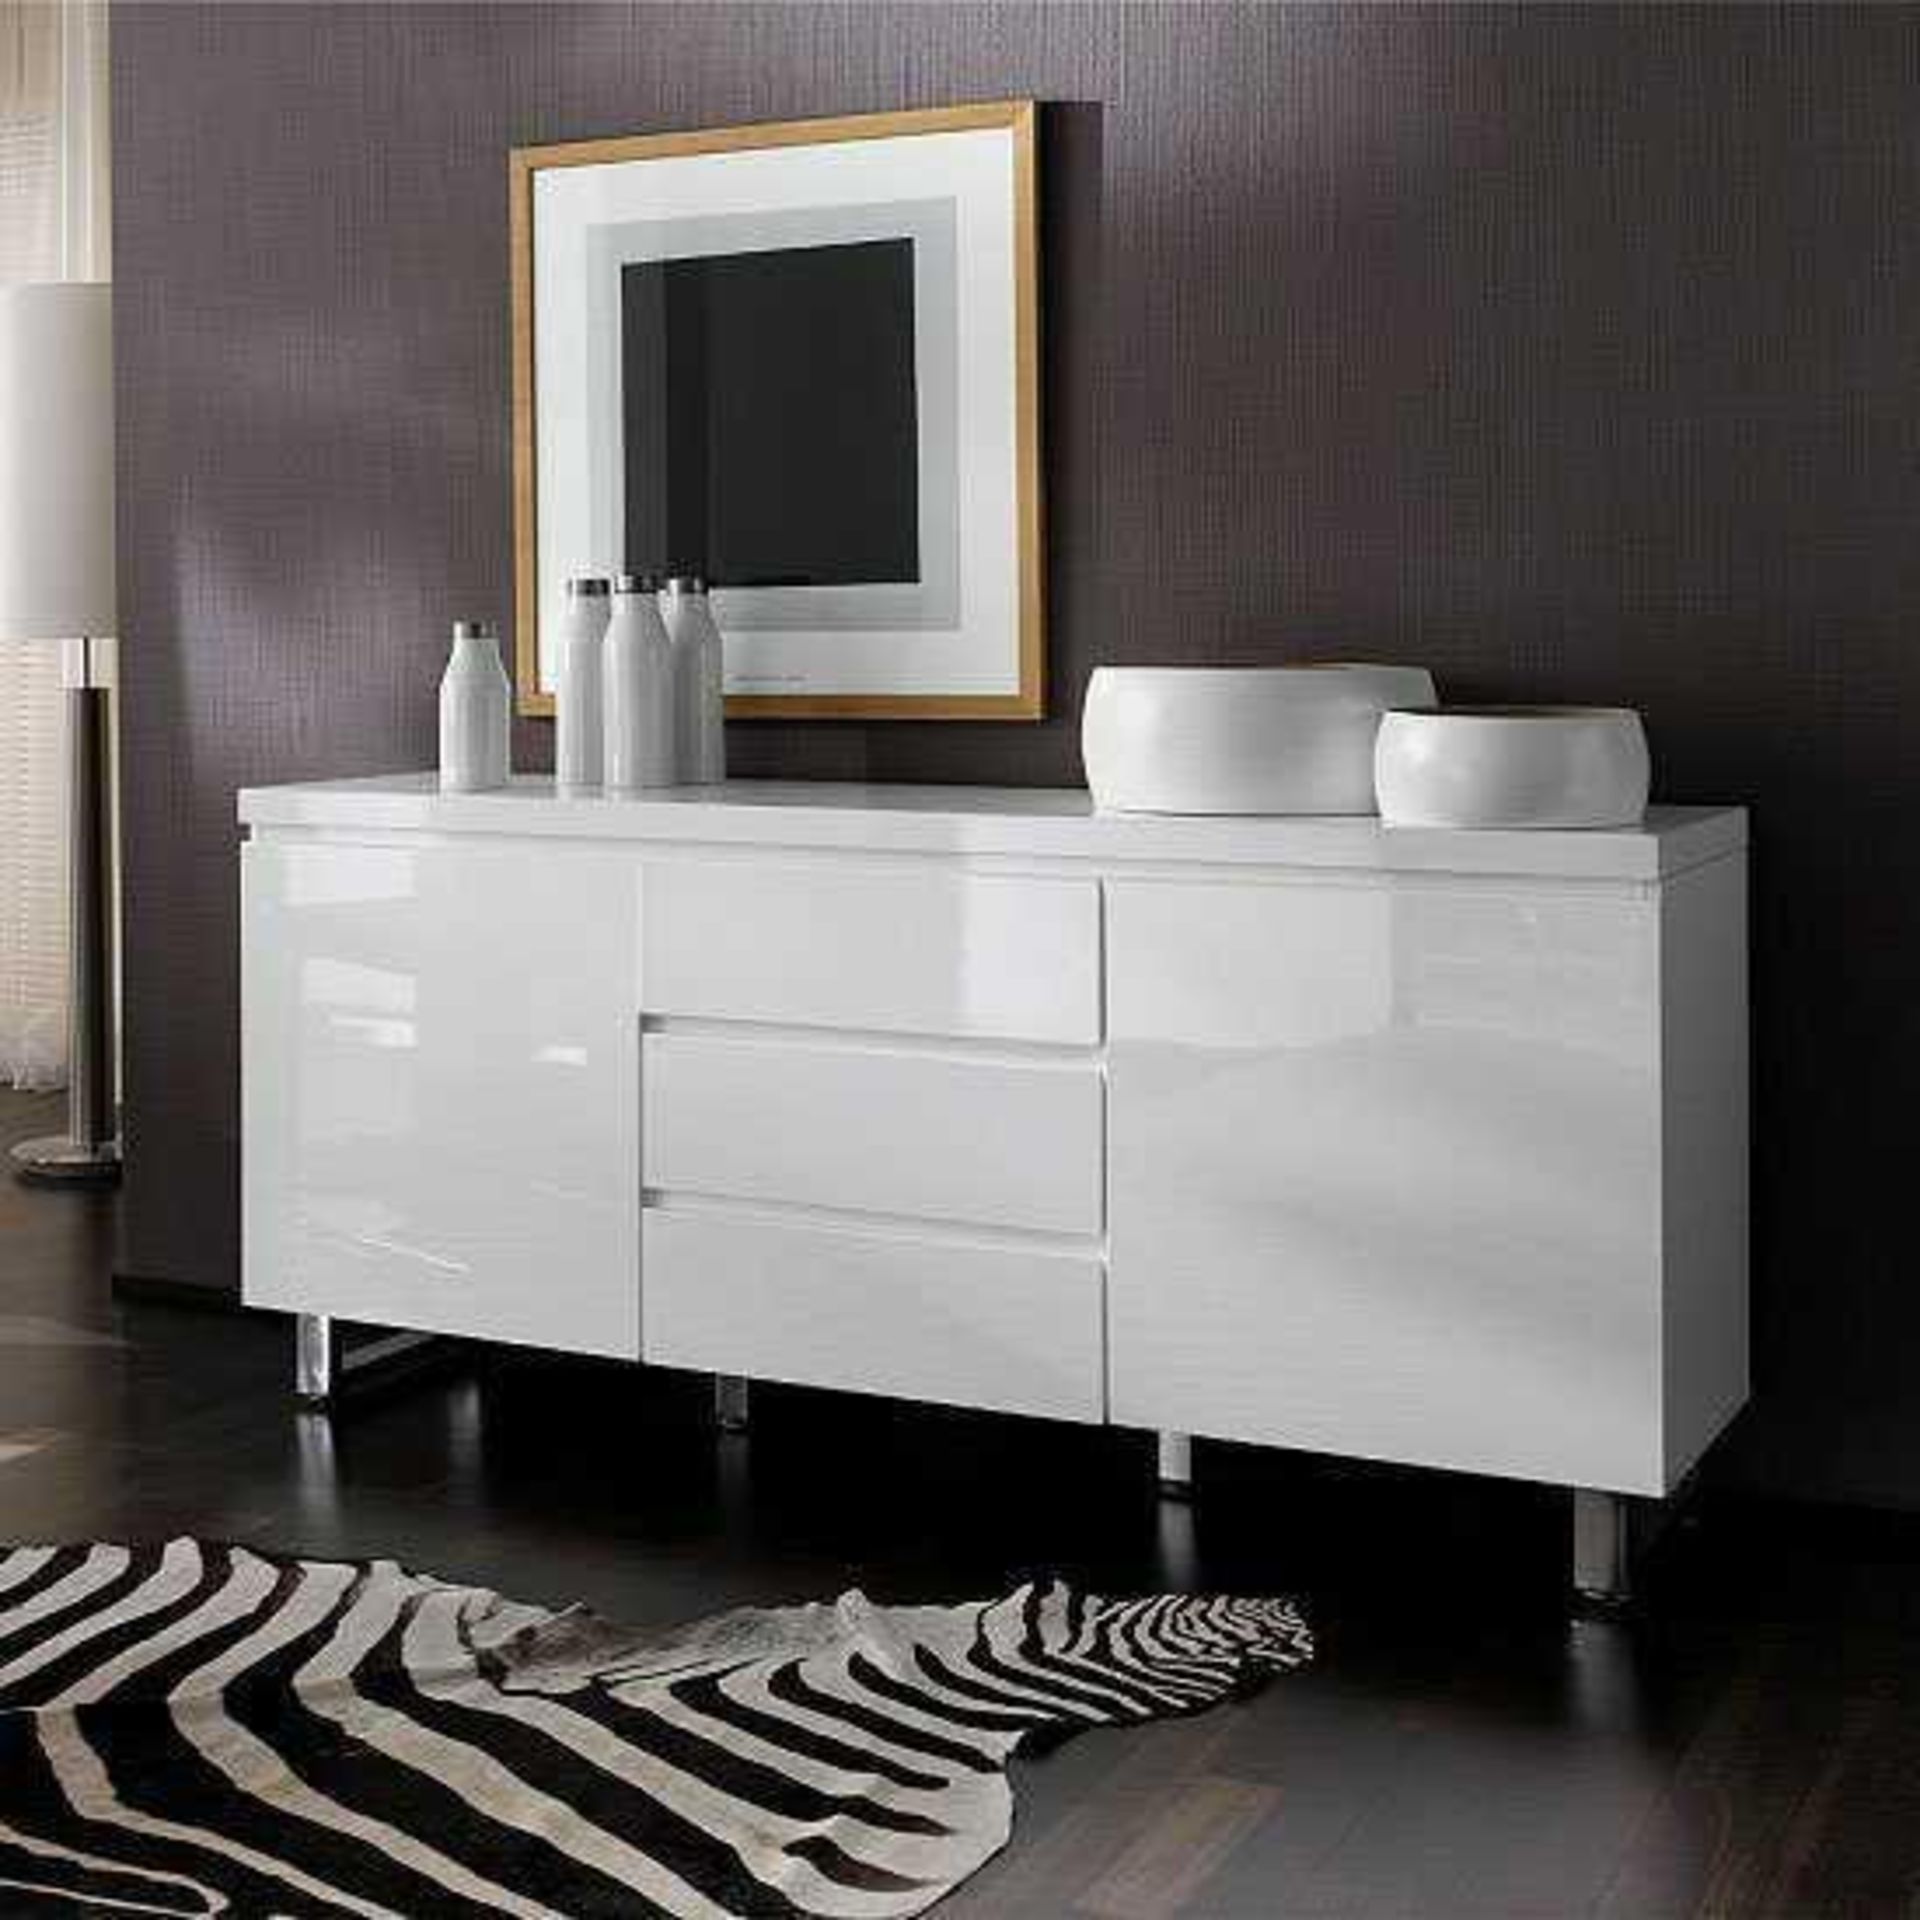 (Jb) RRP £510 Lot To Contain 1 Boxed Furniture In Fashion Sydney 2 Door Large Sideboard In High Glos